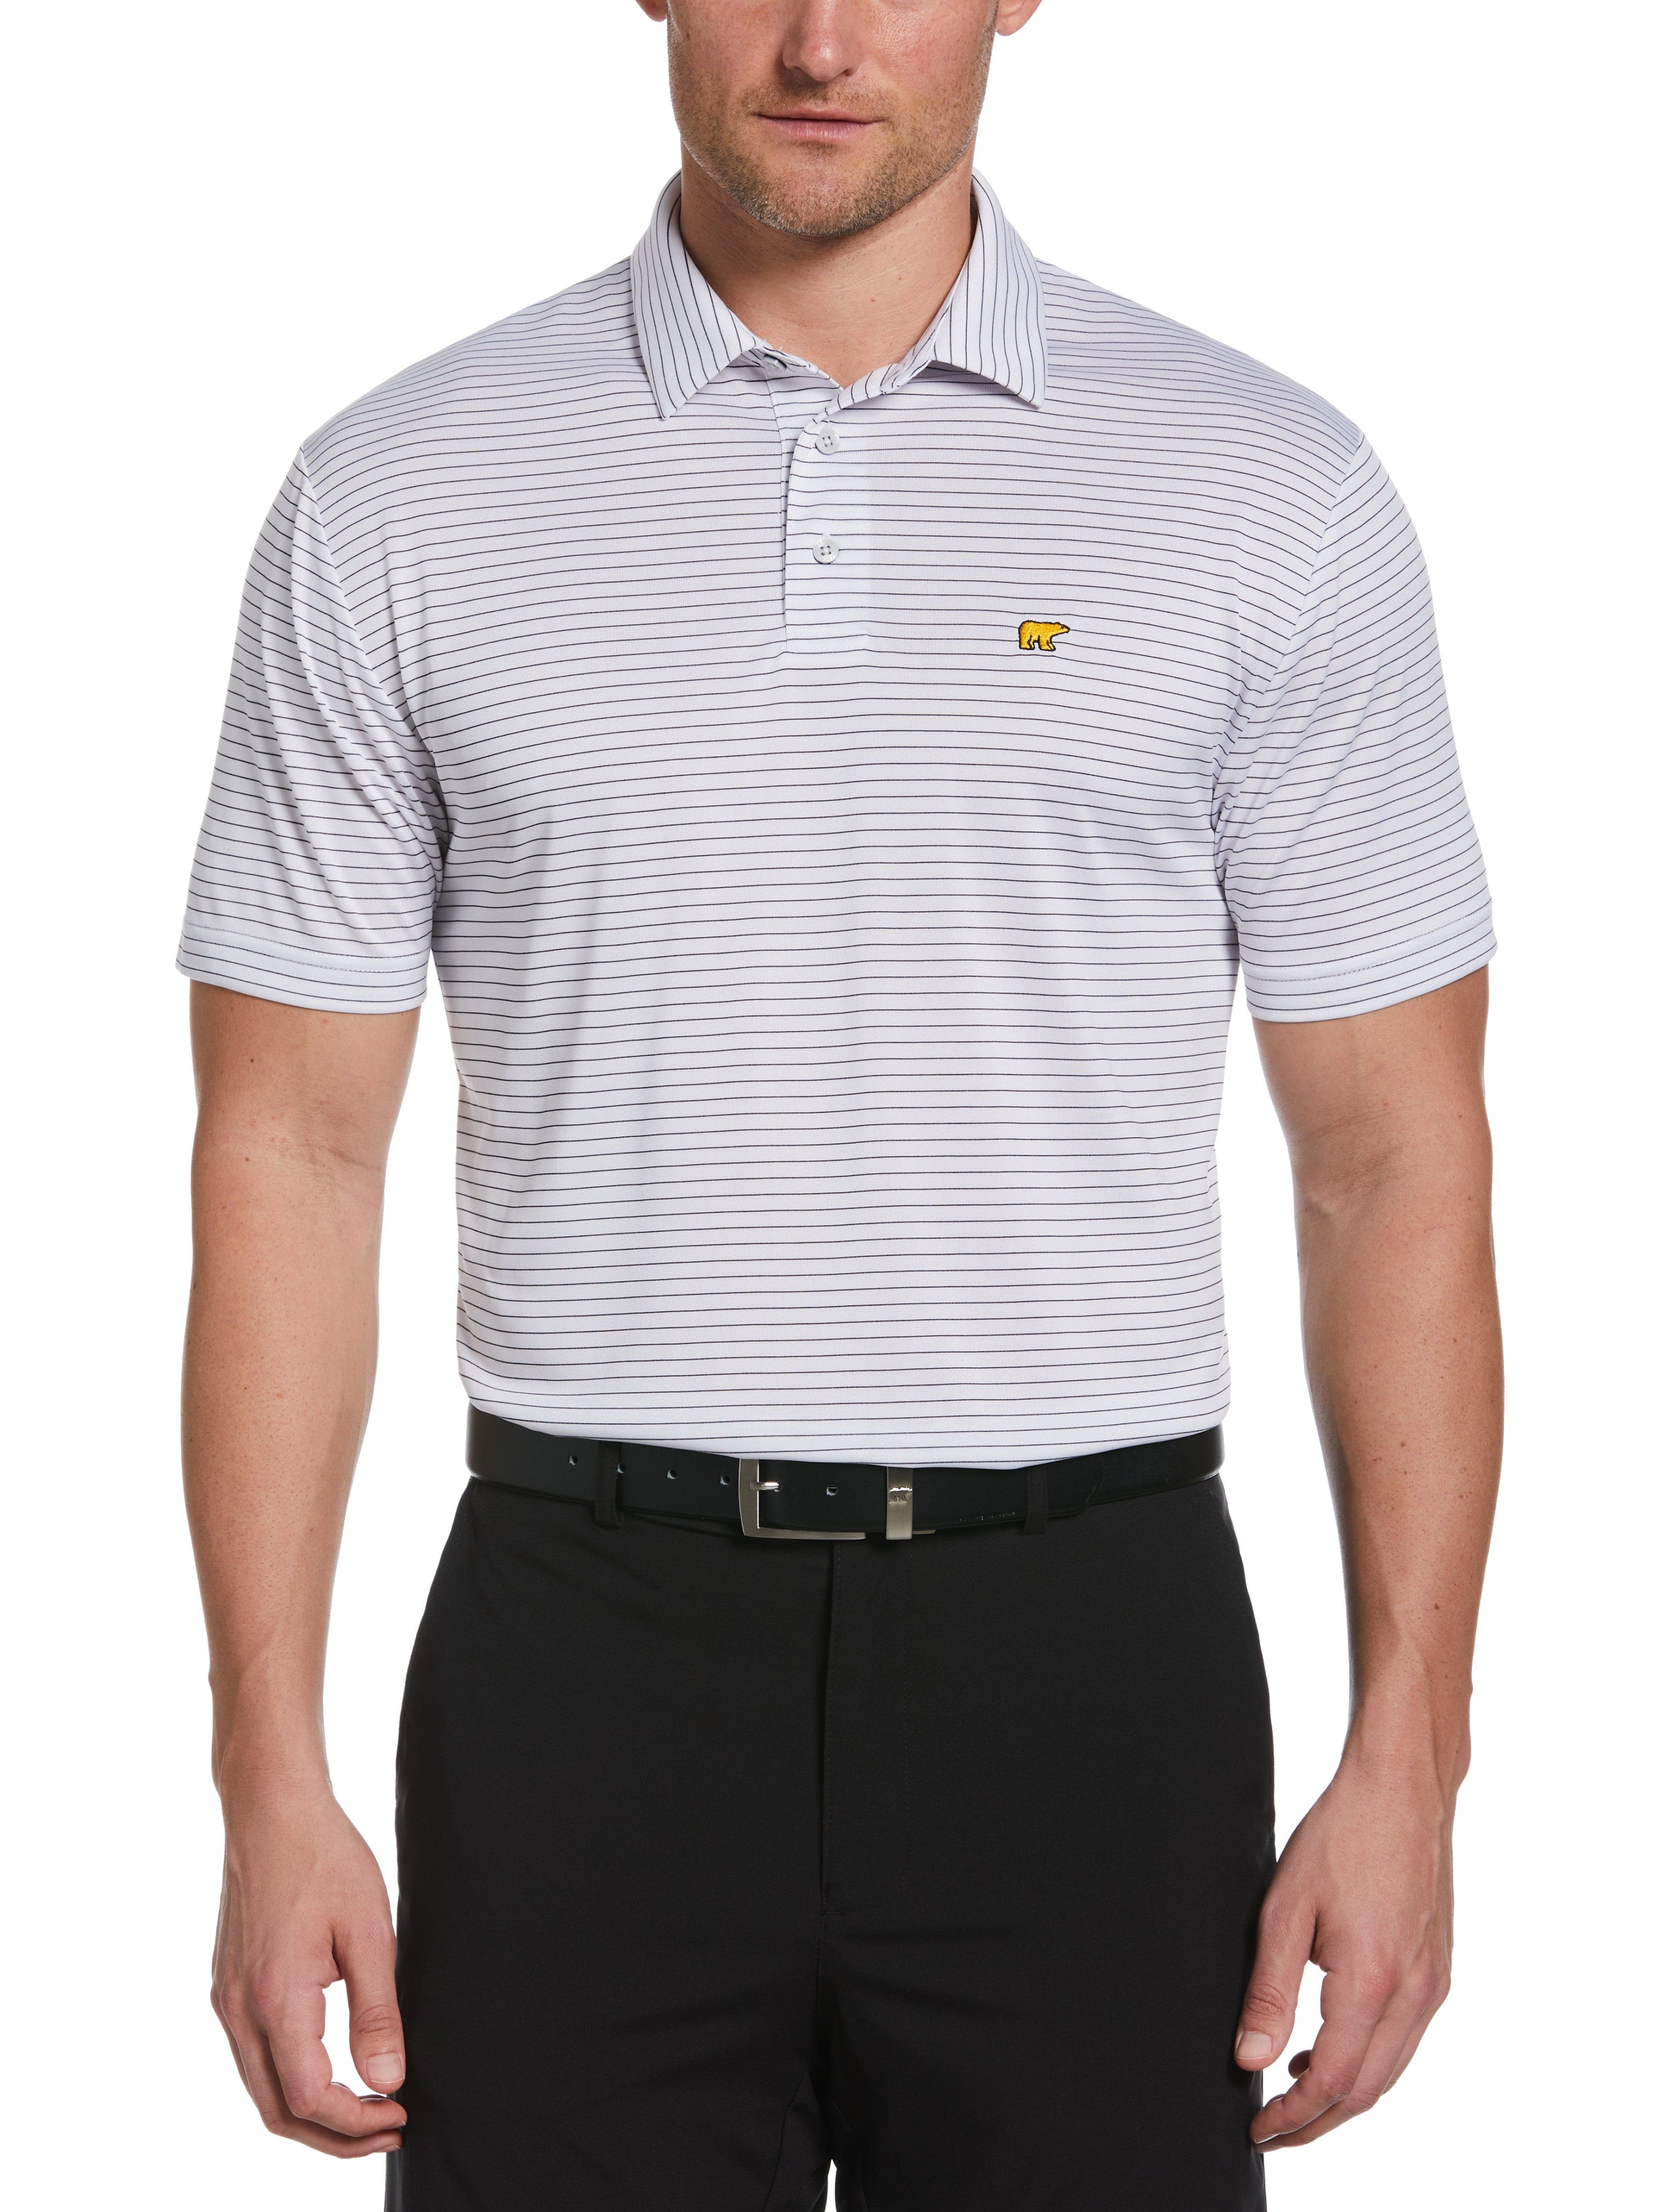 Jack Nicklaus Mens Two Color Stripe Golf Polo Shirt, Size Medium, White, 100% Polyester | Golf Apparel Shop